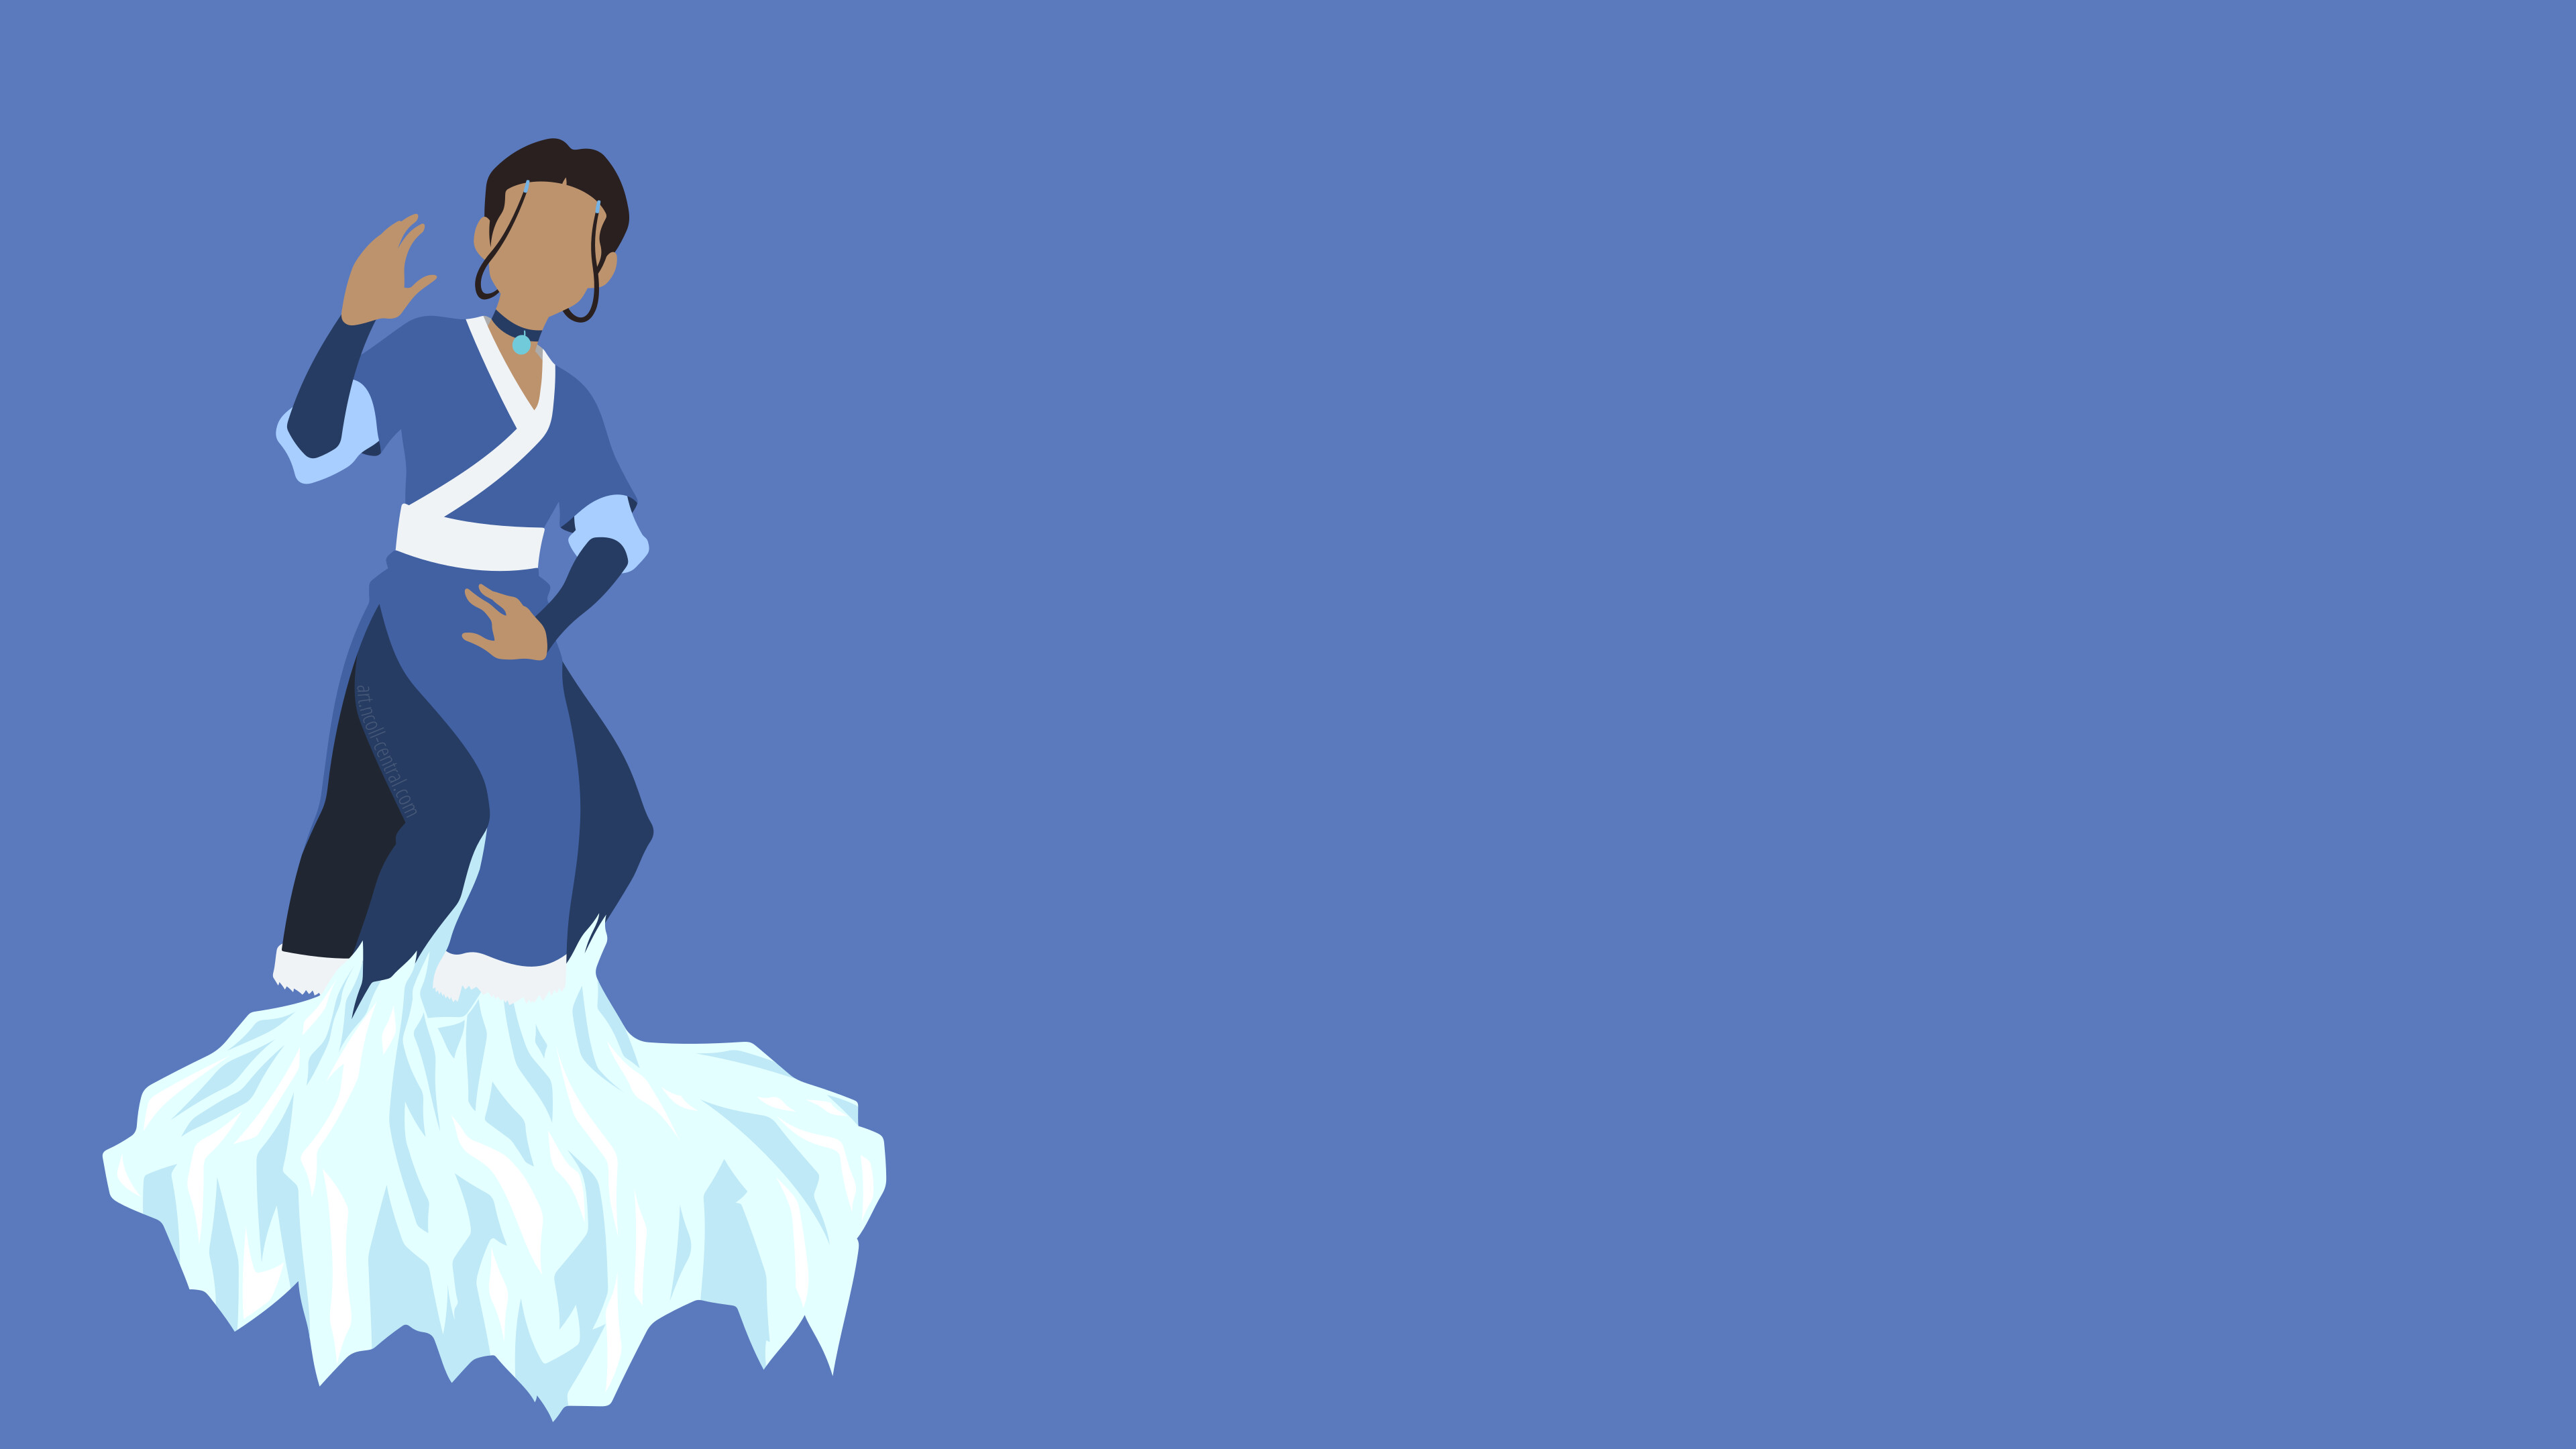 Avatar: The Last Airbender: Katara, a waterbending master, born in the Southern Water Tribe. 3840x2160 4K Wallpaper.